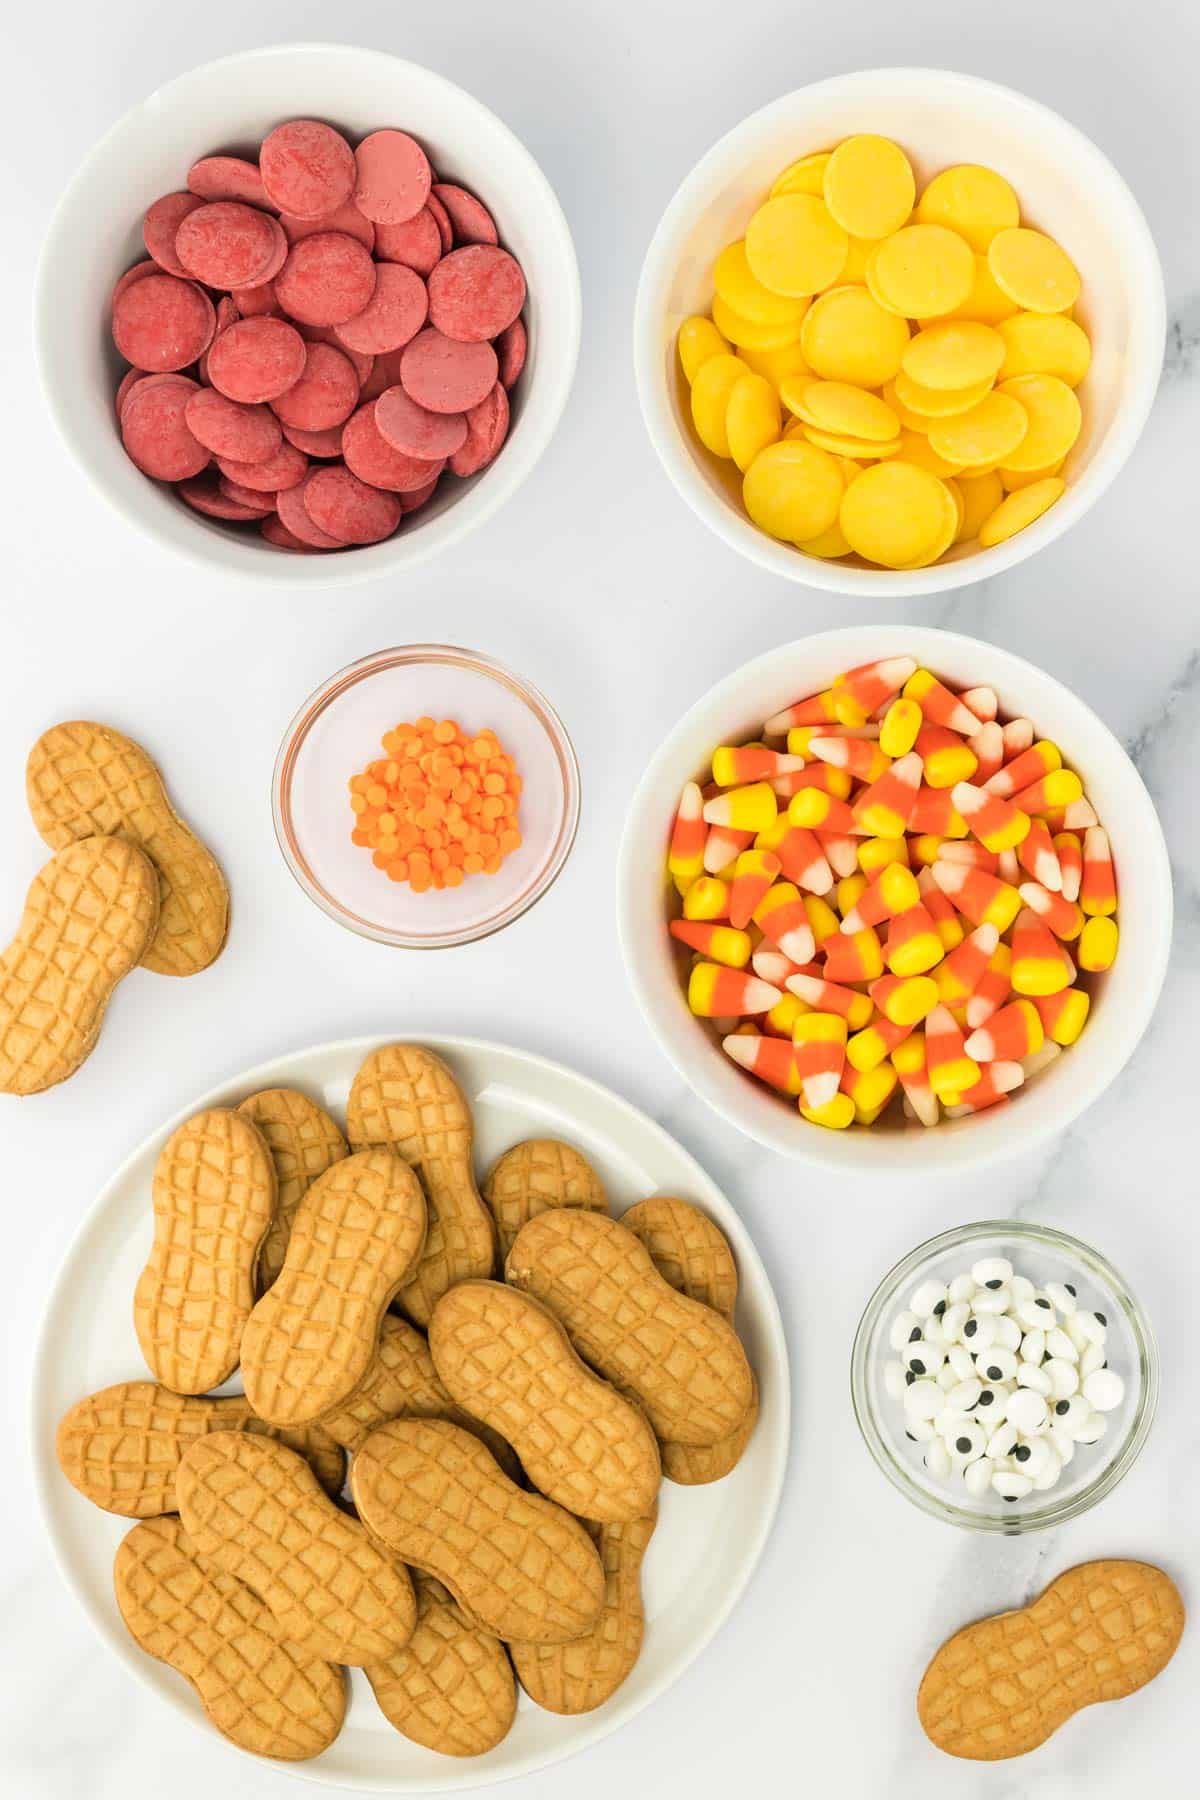 A variety of candy and Nutter Butter cookies in bowls on a white surface.